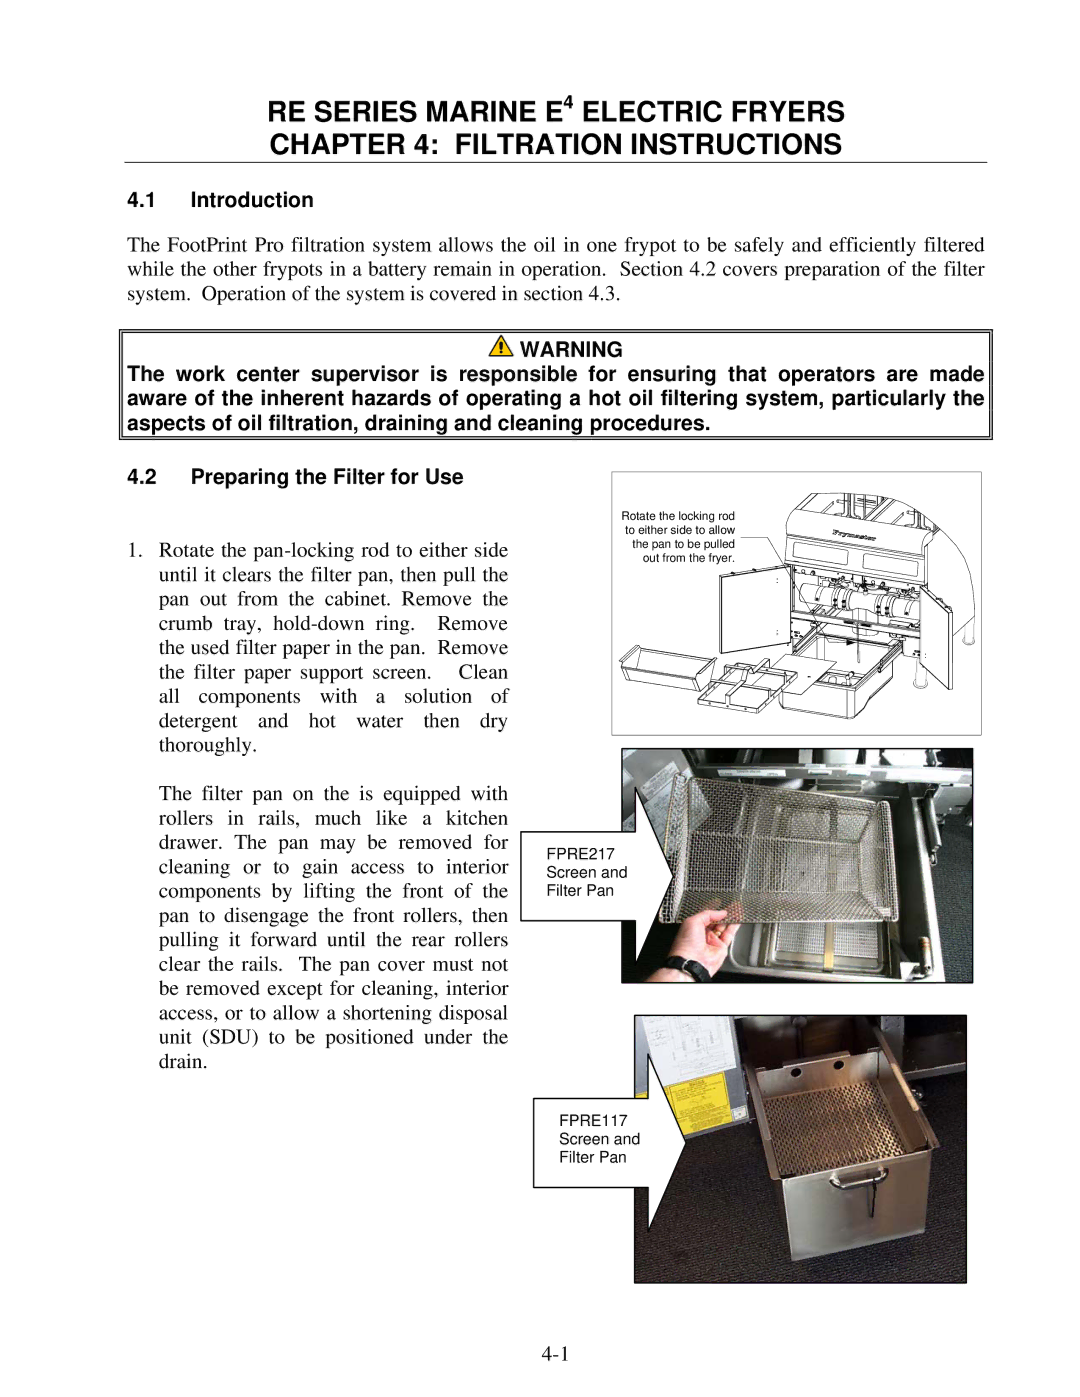 Frymaster manual RE Series Marine E4 Electric Fryers Filtration Instructions 